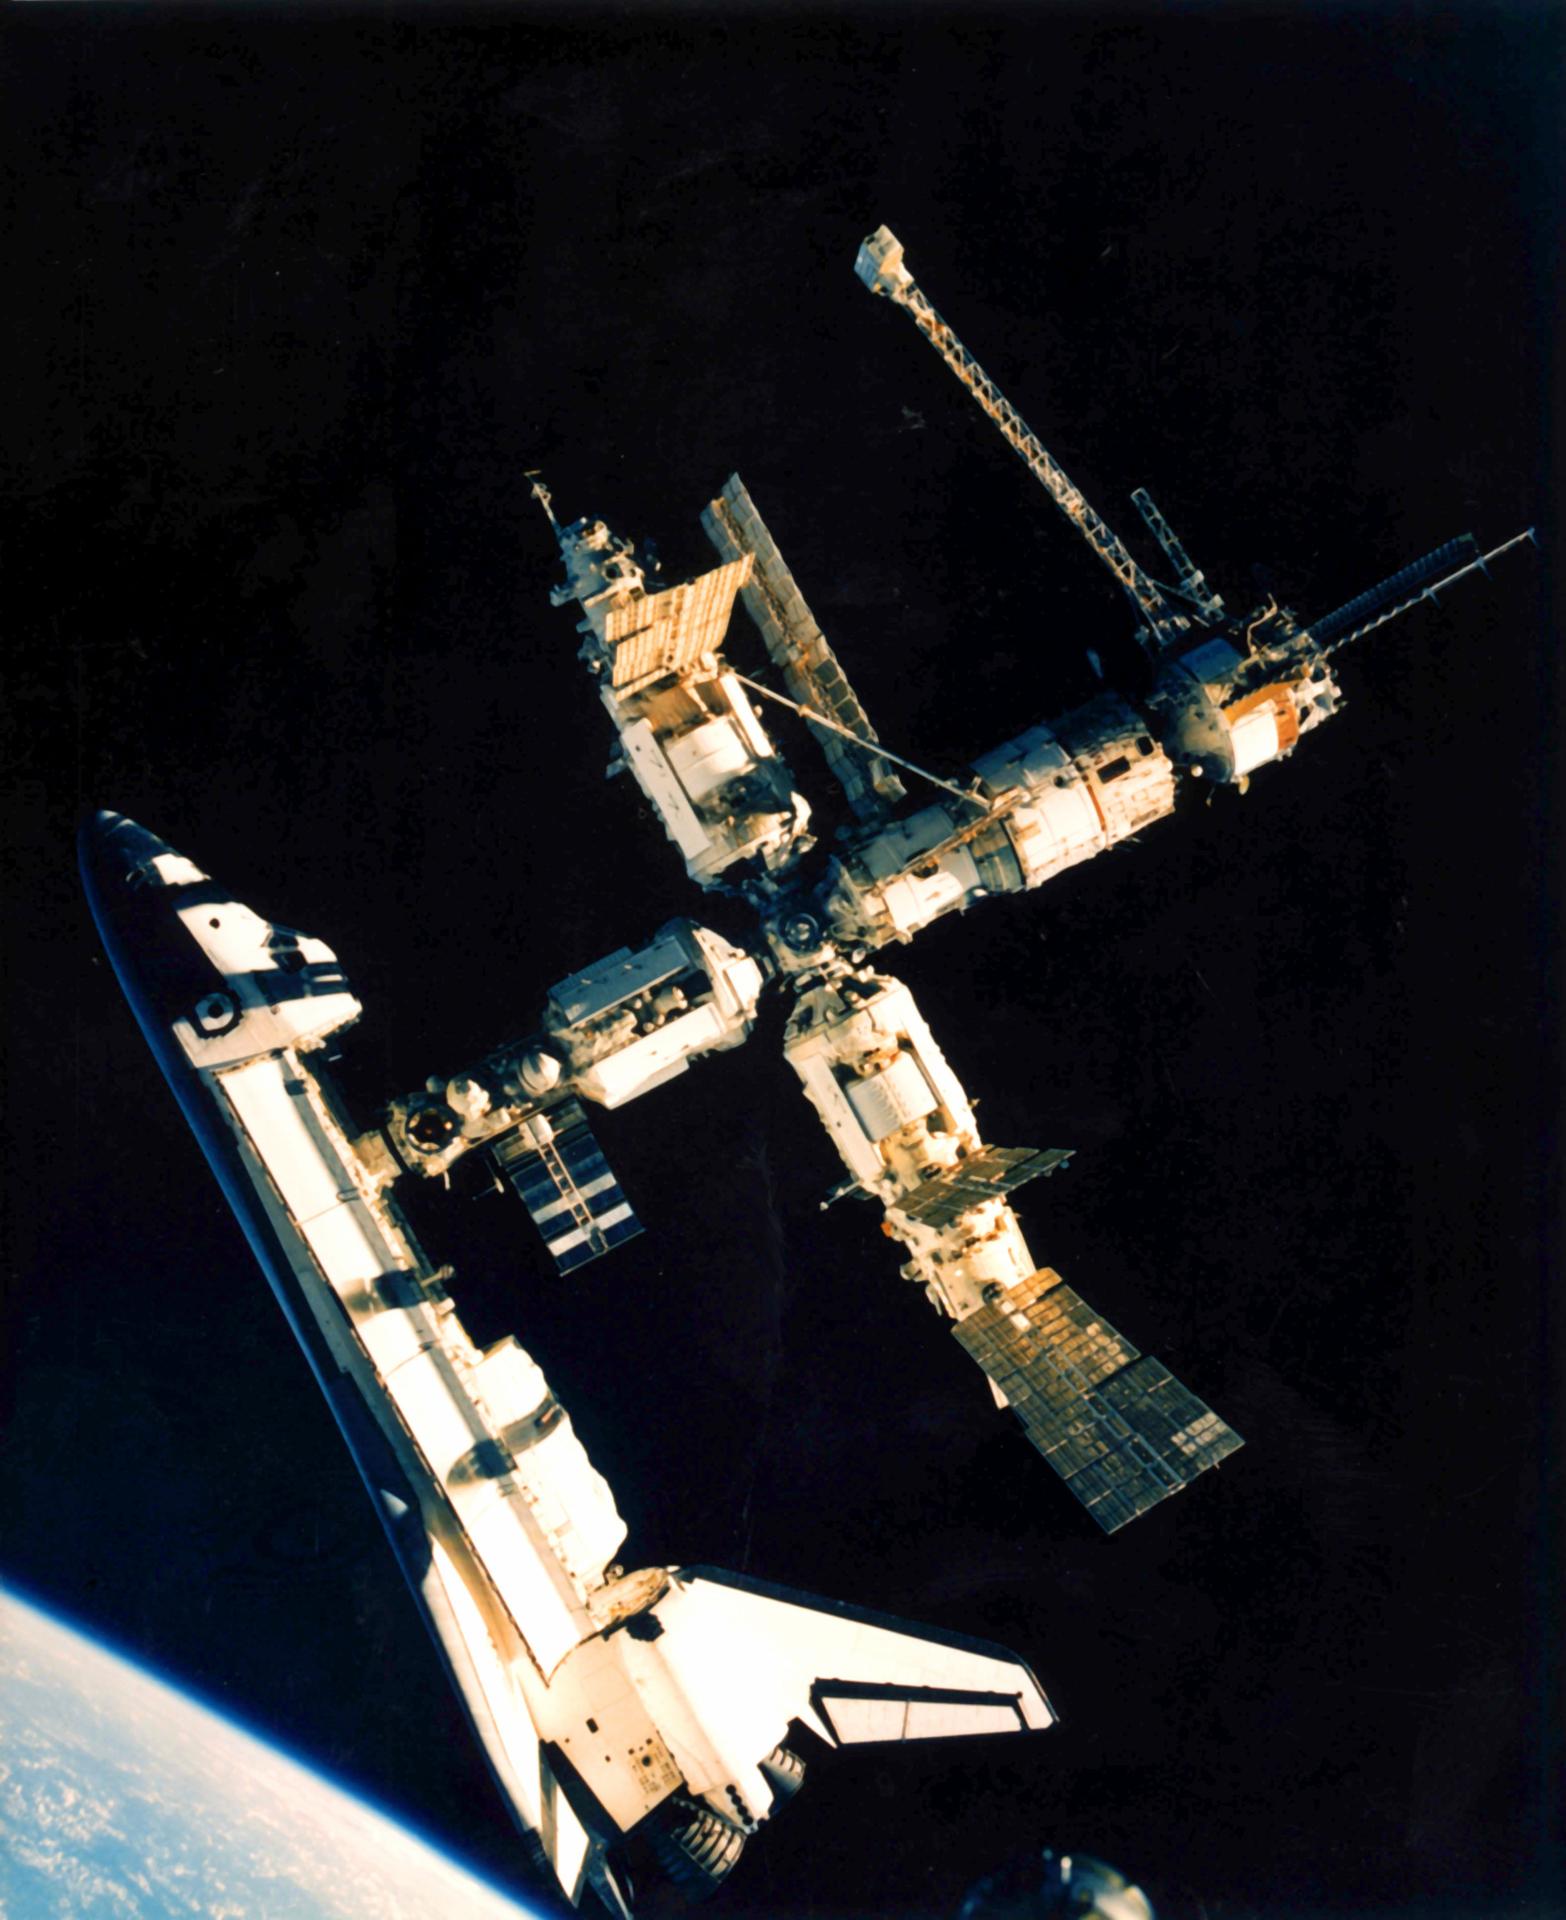 Space shuttle Atlantis docked with space station Mir